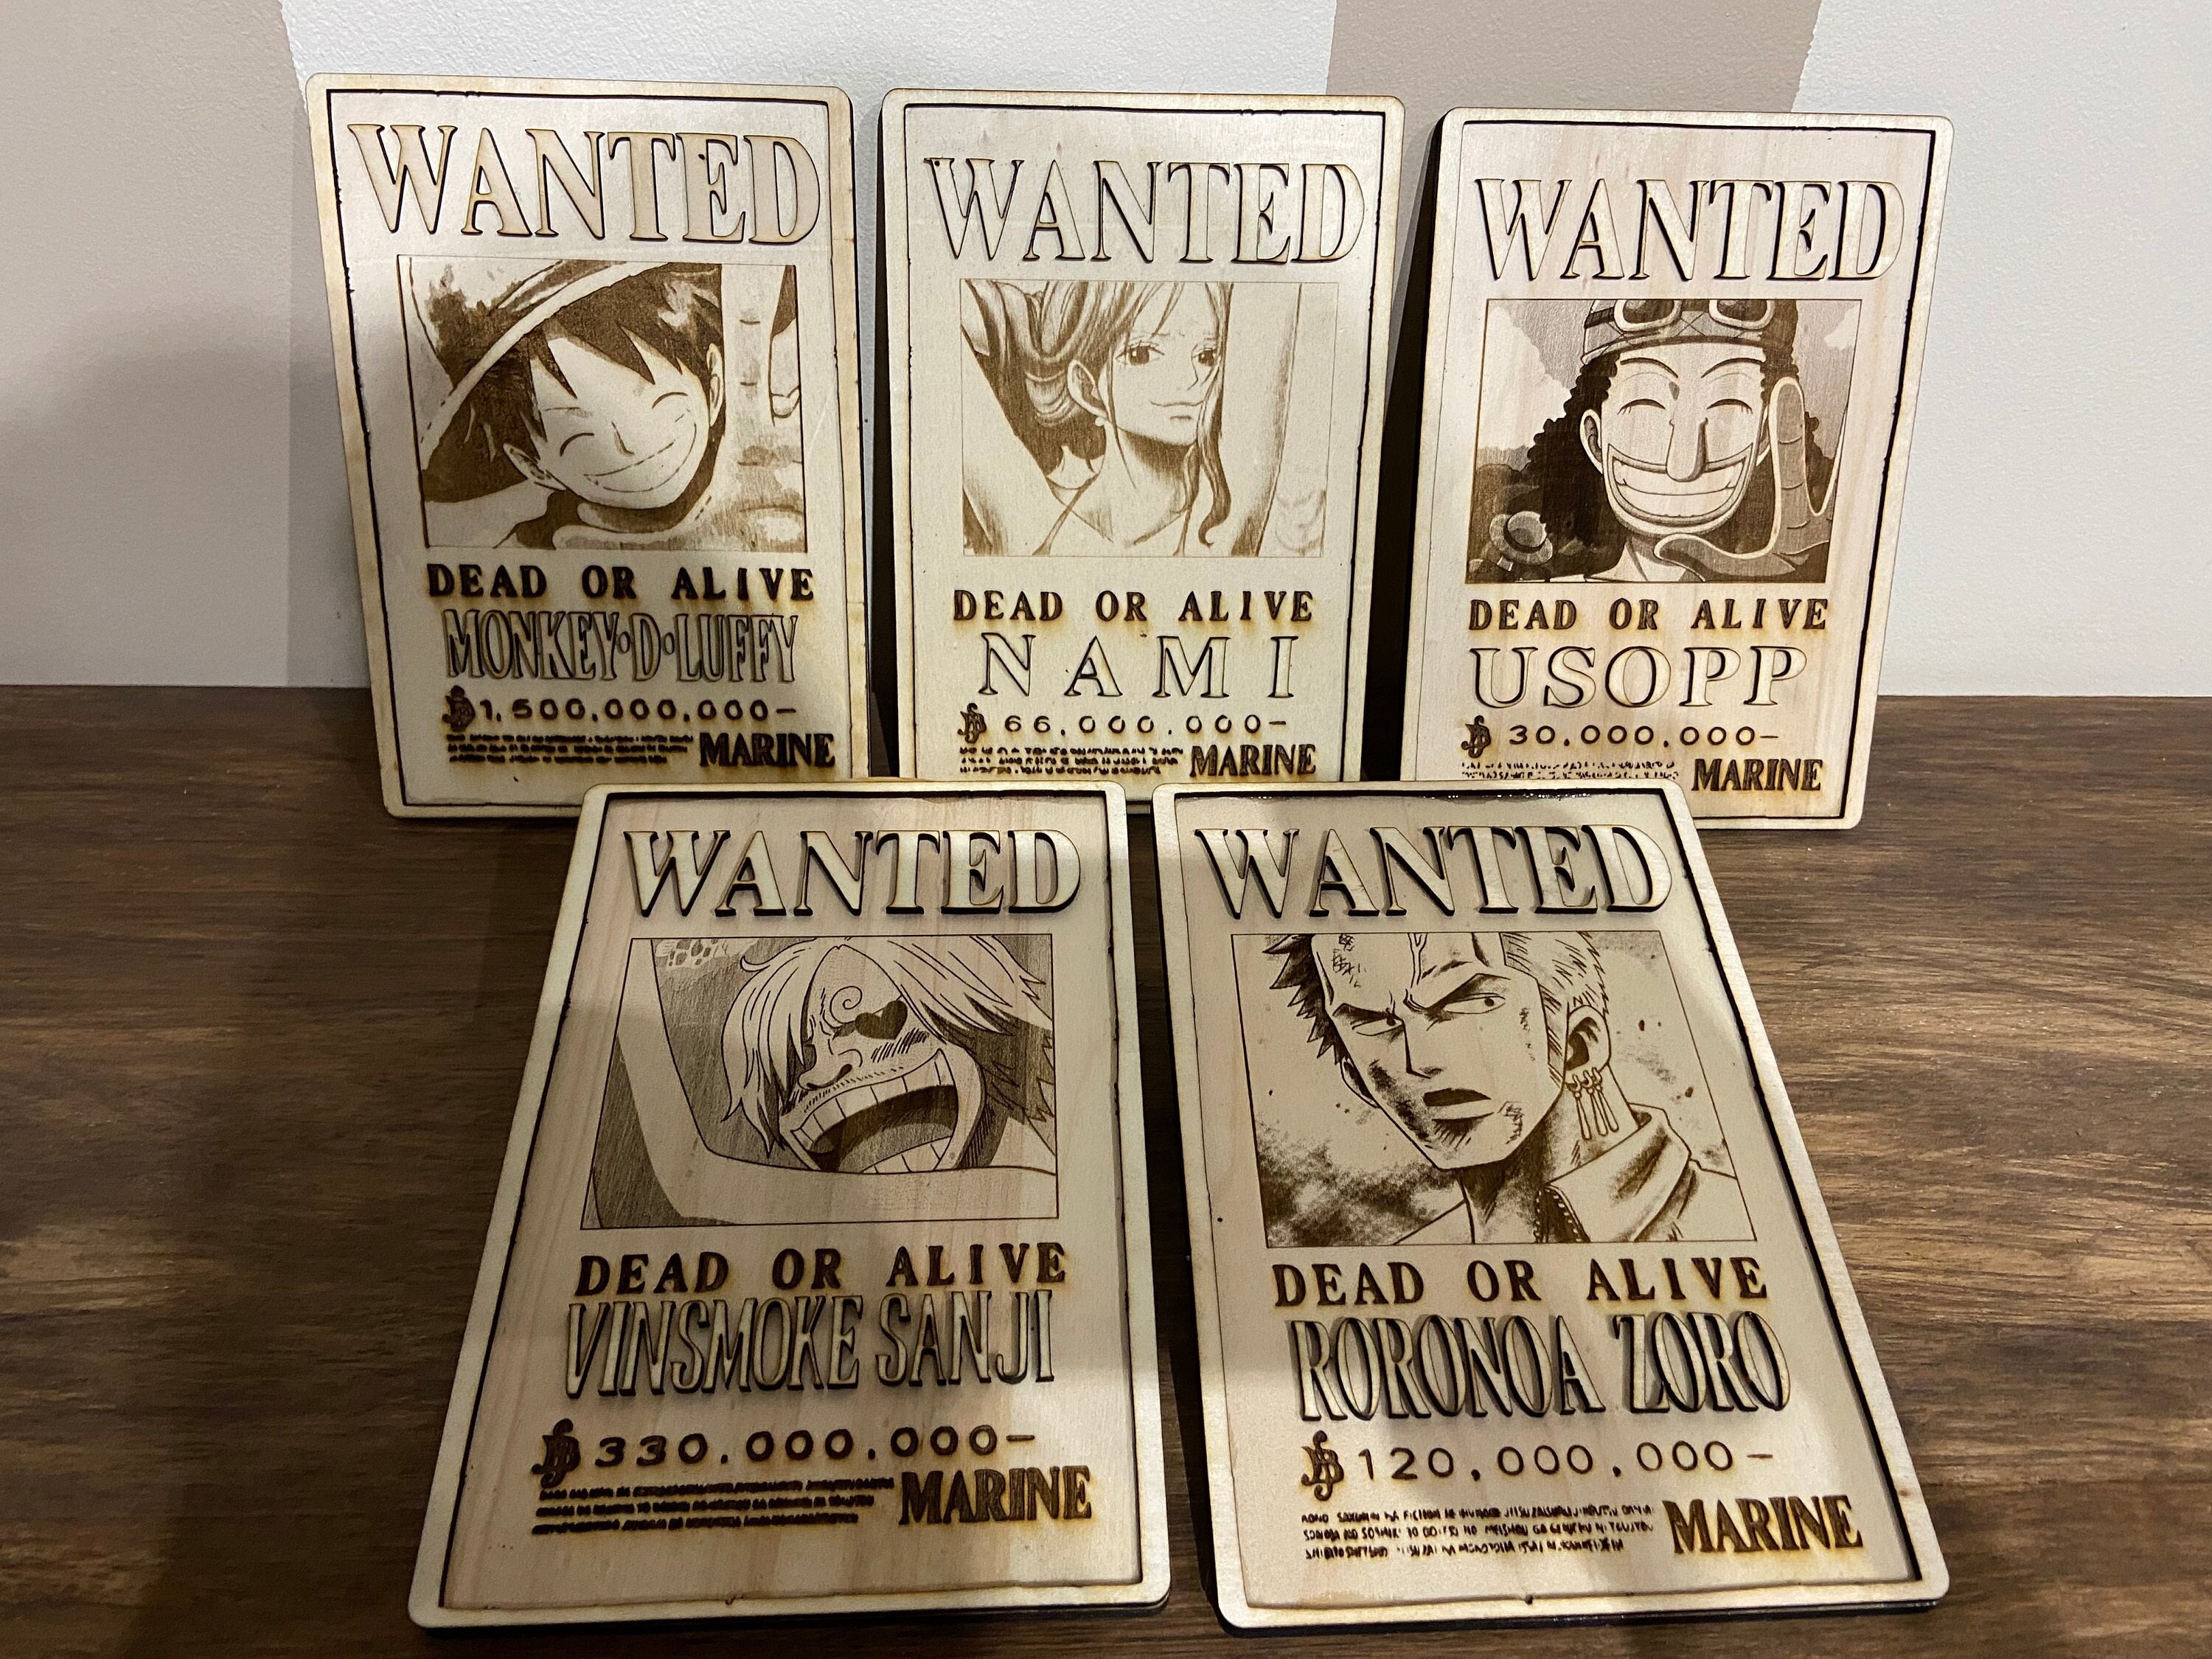 One Piece Wanted Poster One Piece Wallpaper Big Size 42*29cm